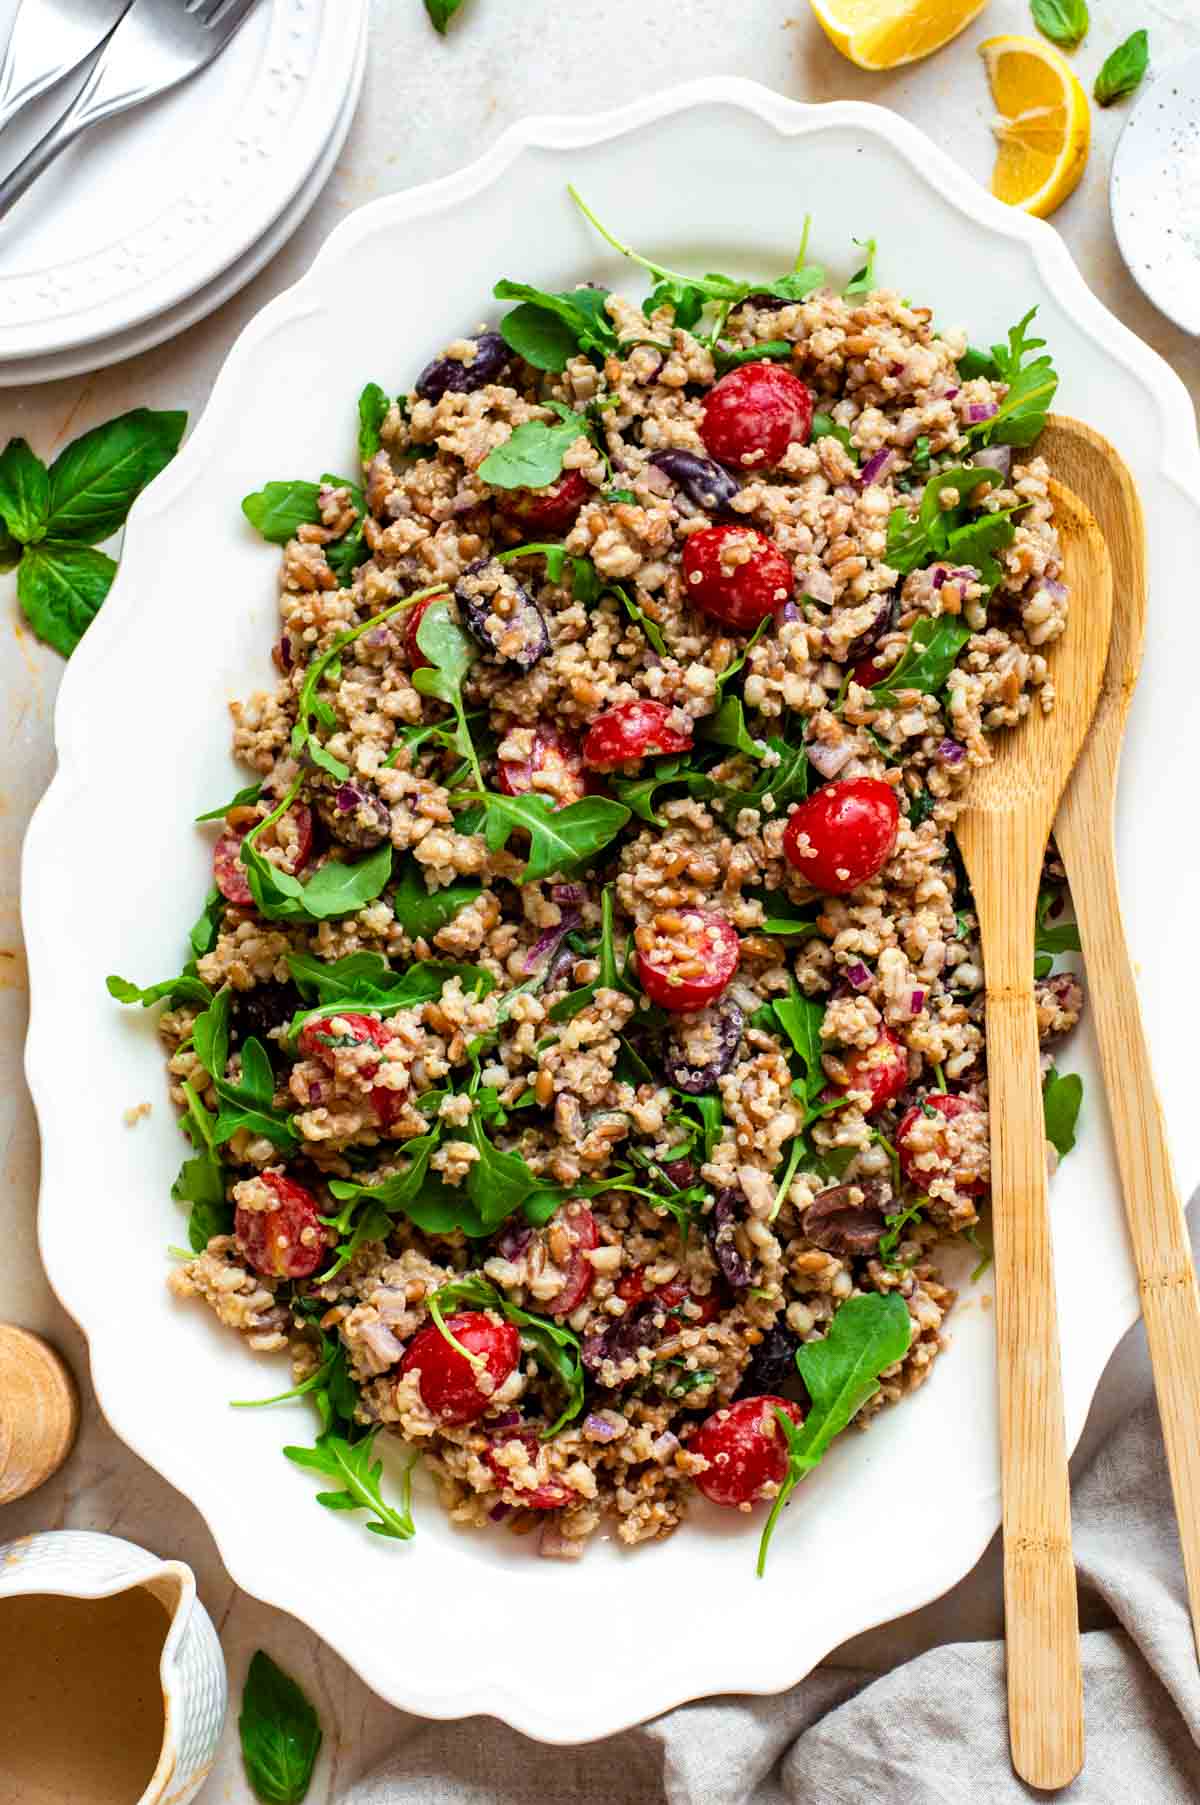 Ancient grains salad served on a white platter with wooden salad servers placed in the right corner.